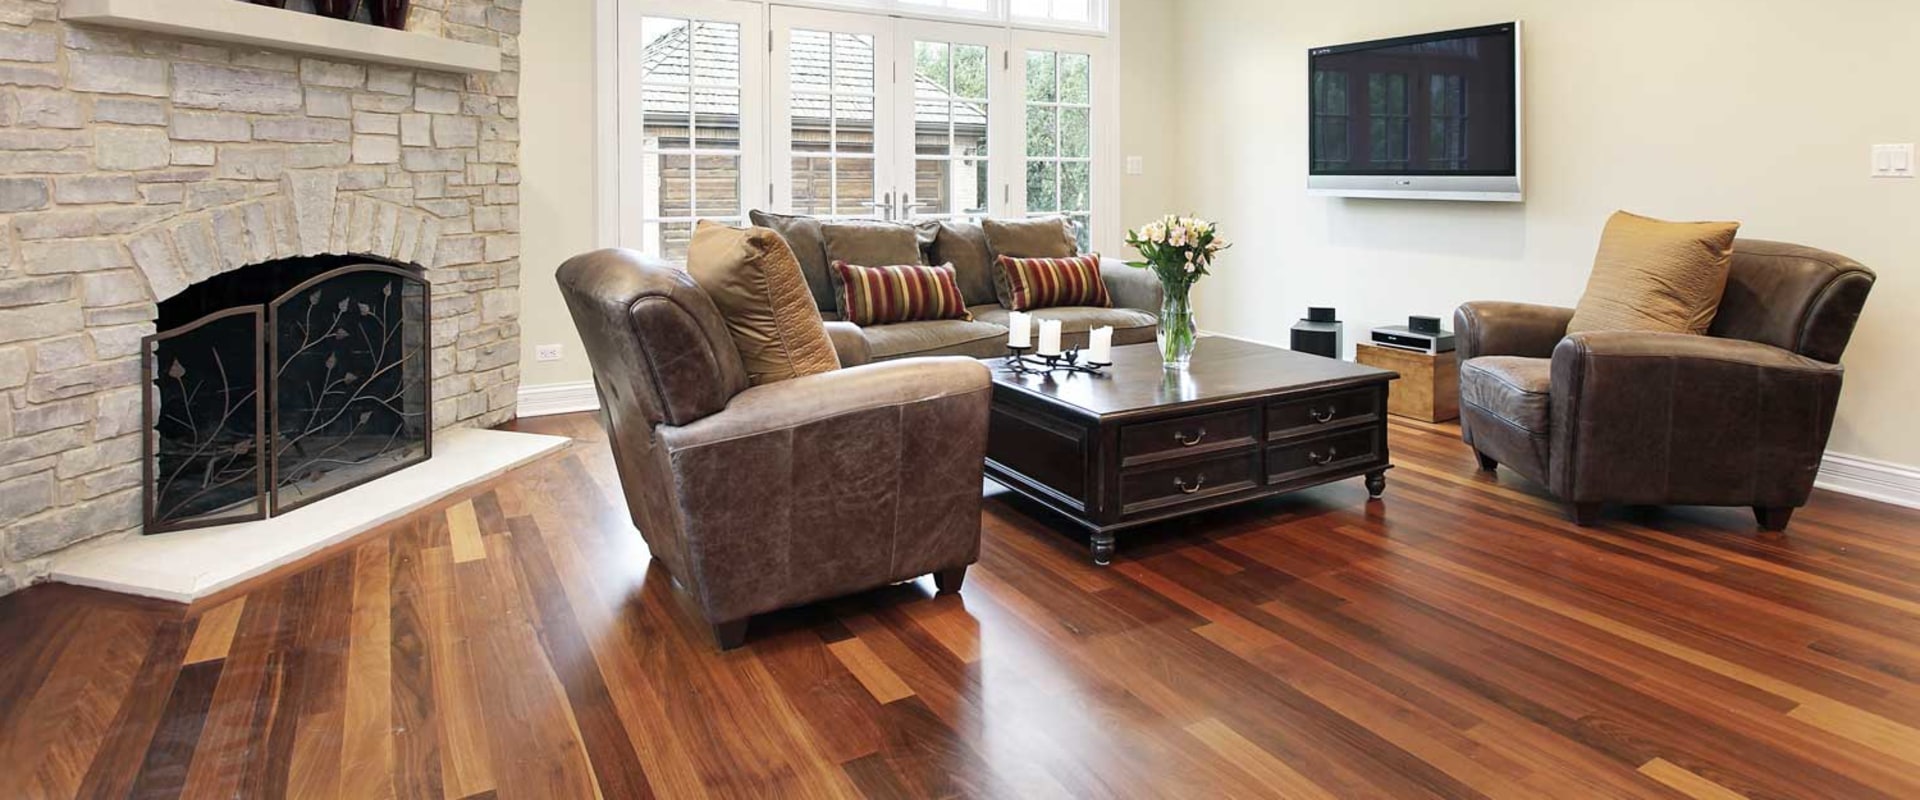 Are Wood Floors a Smart Investment?